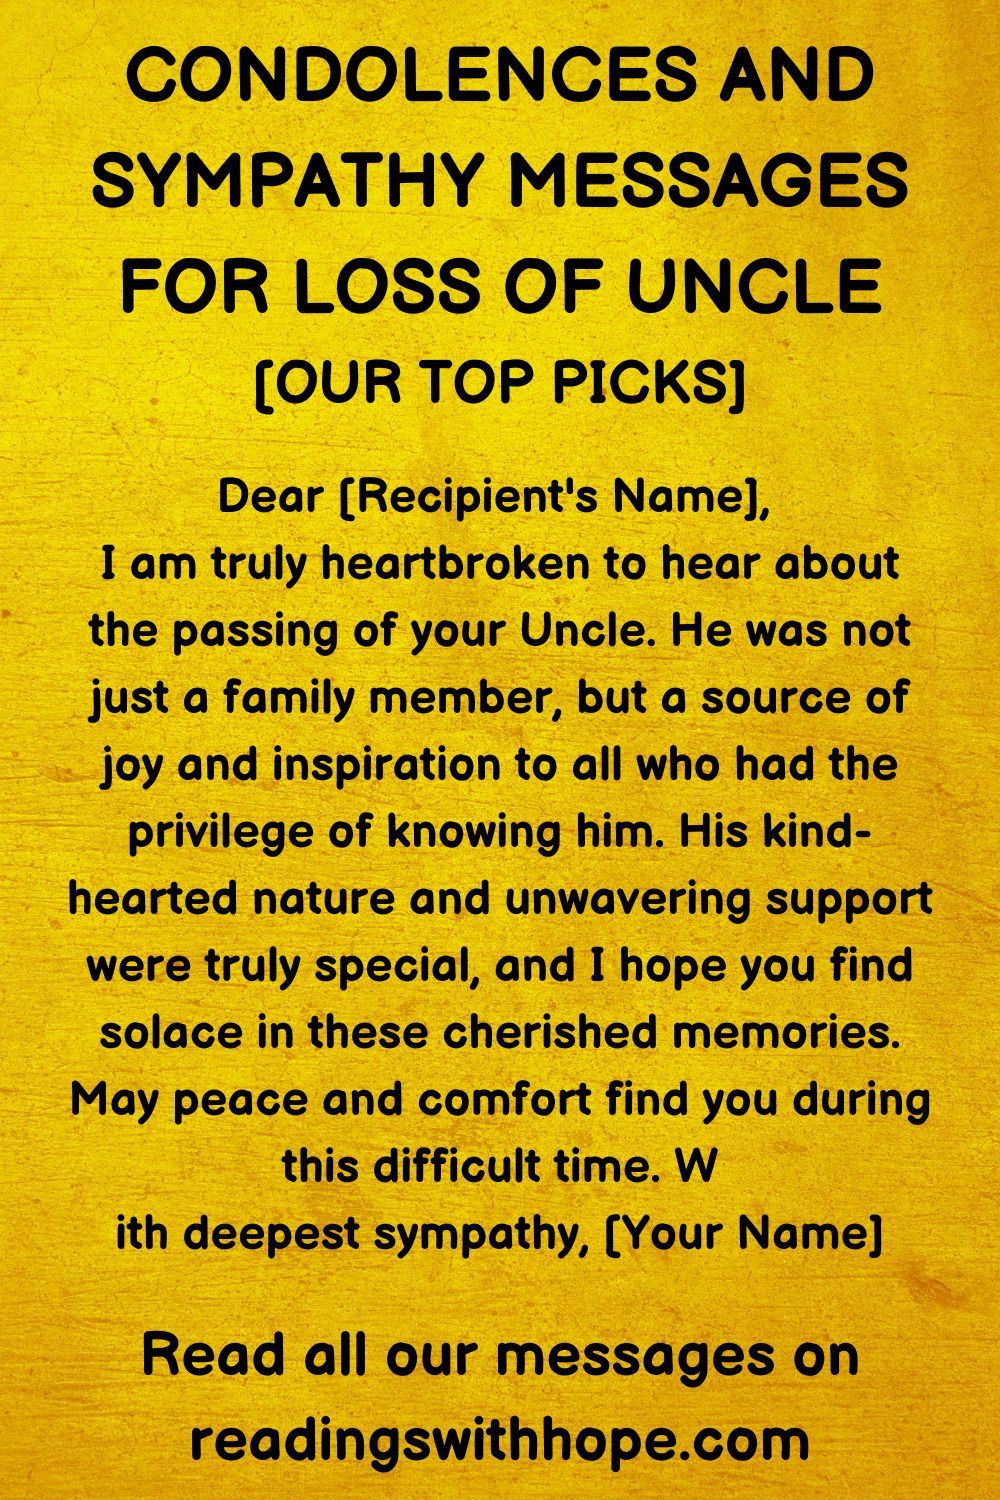 40 Condolence and Sympathy Messages for Loss of Uncle